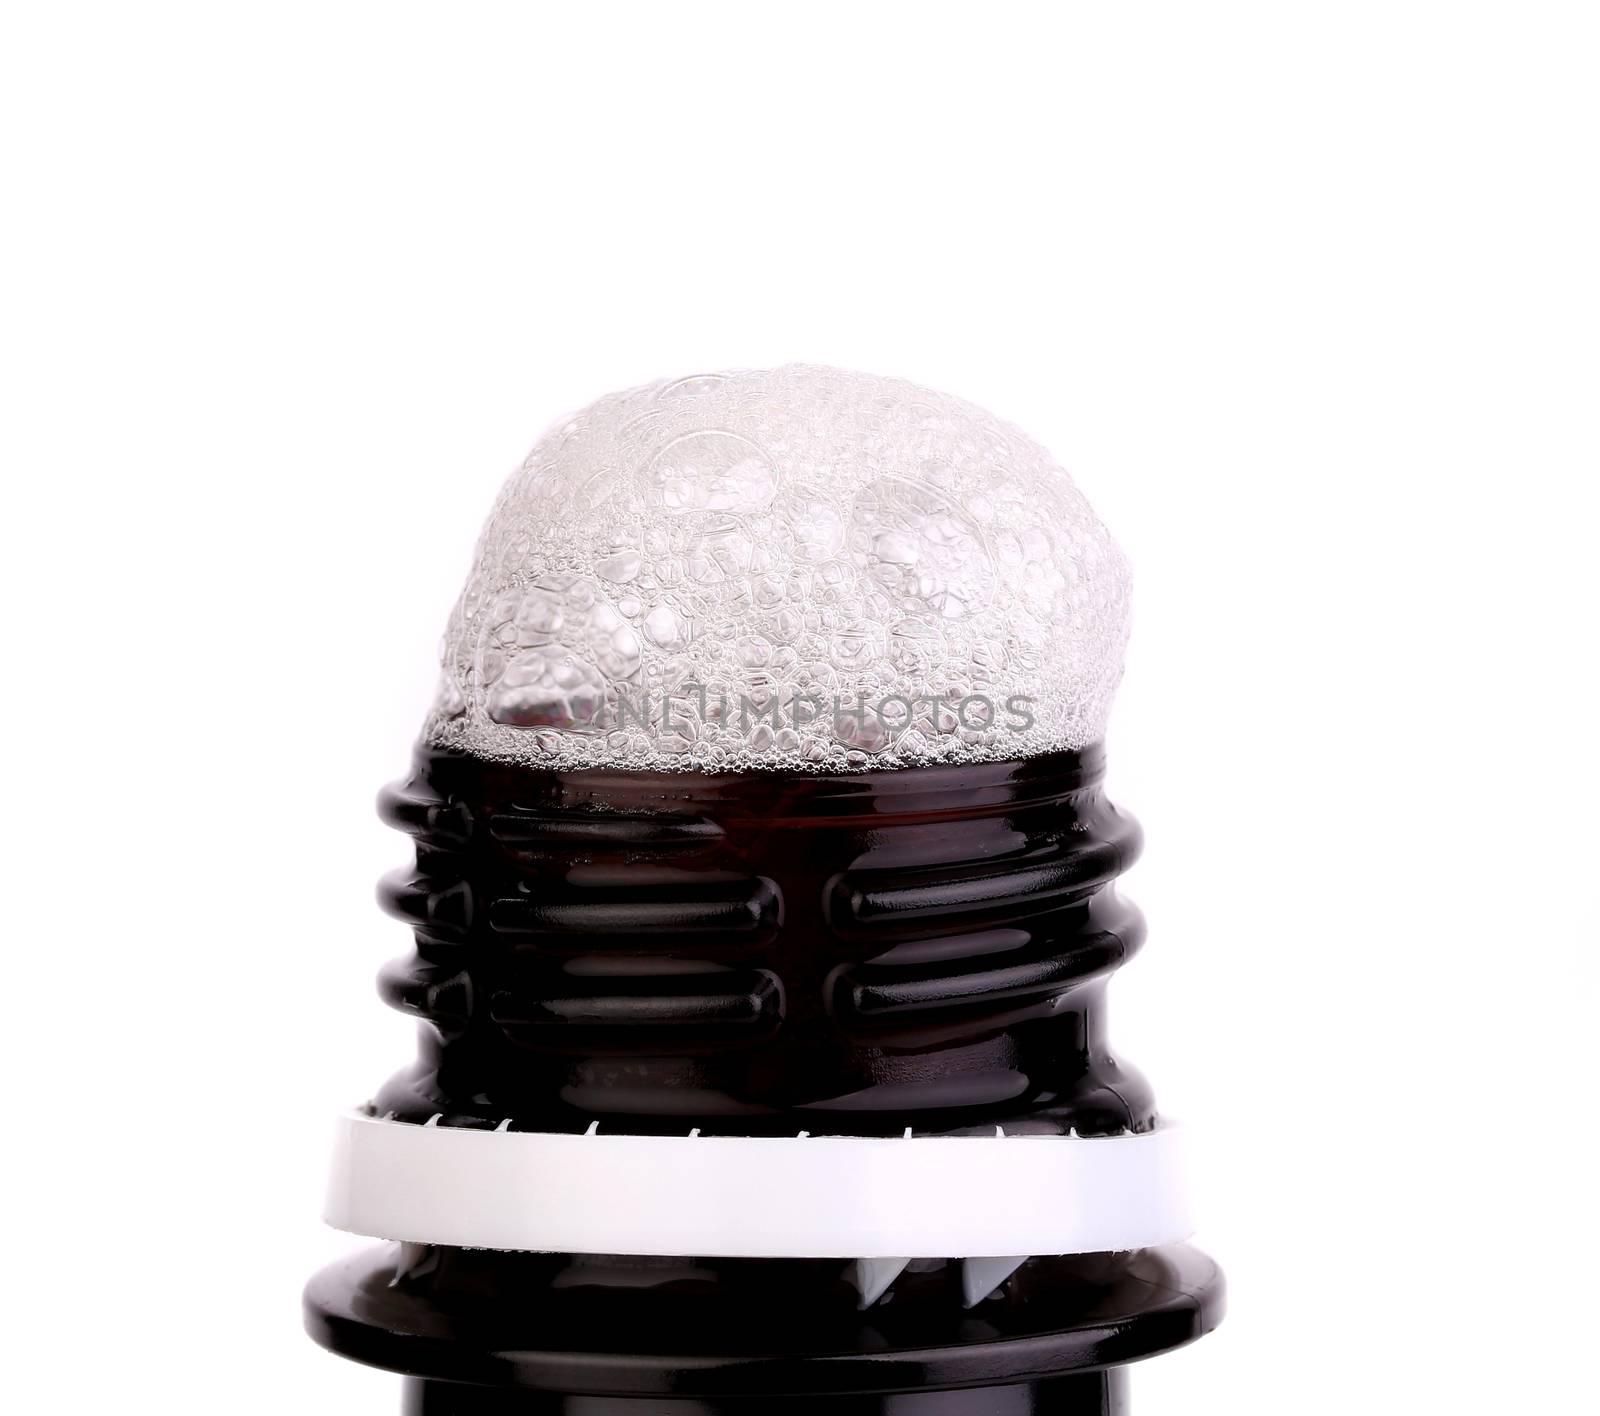 Froth cap of open beer bottle by indigolotos